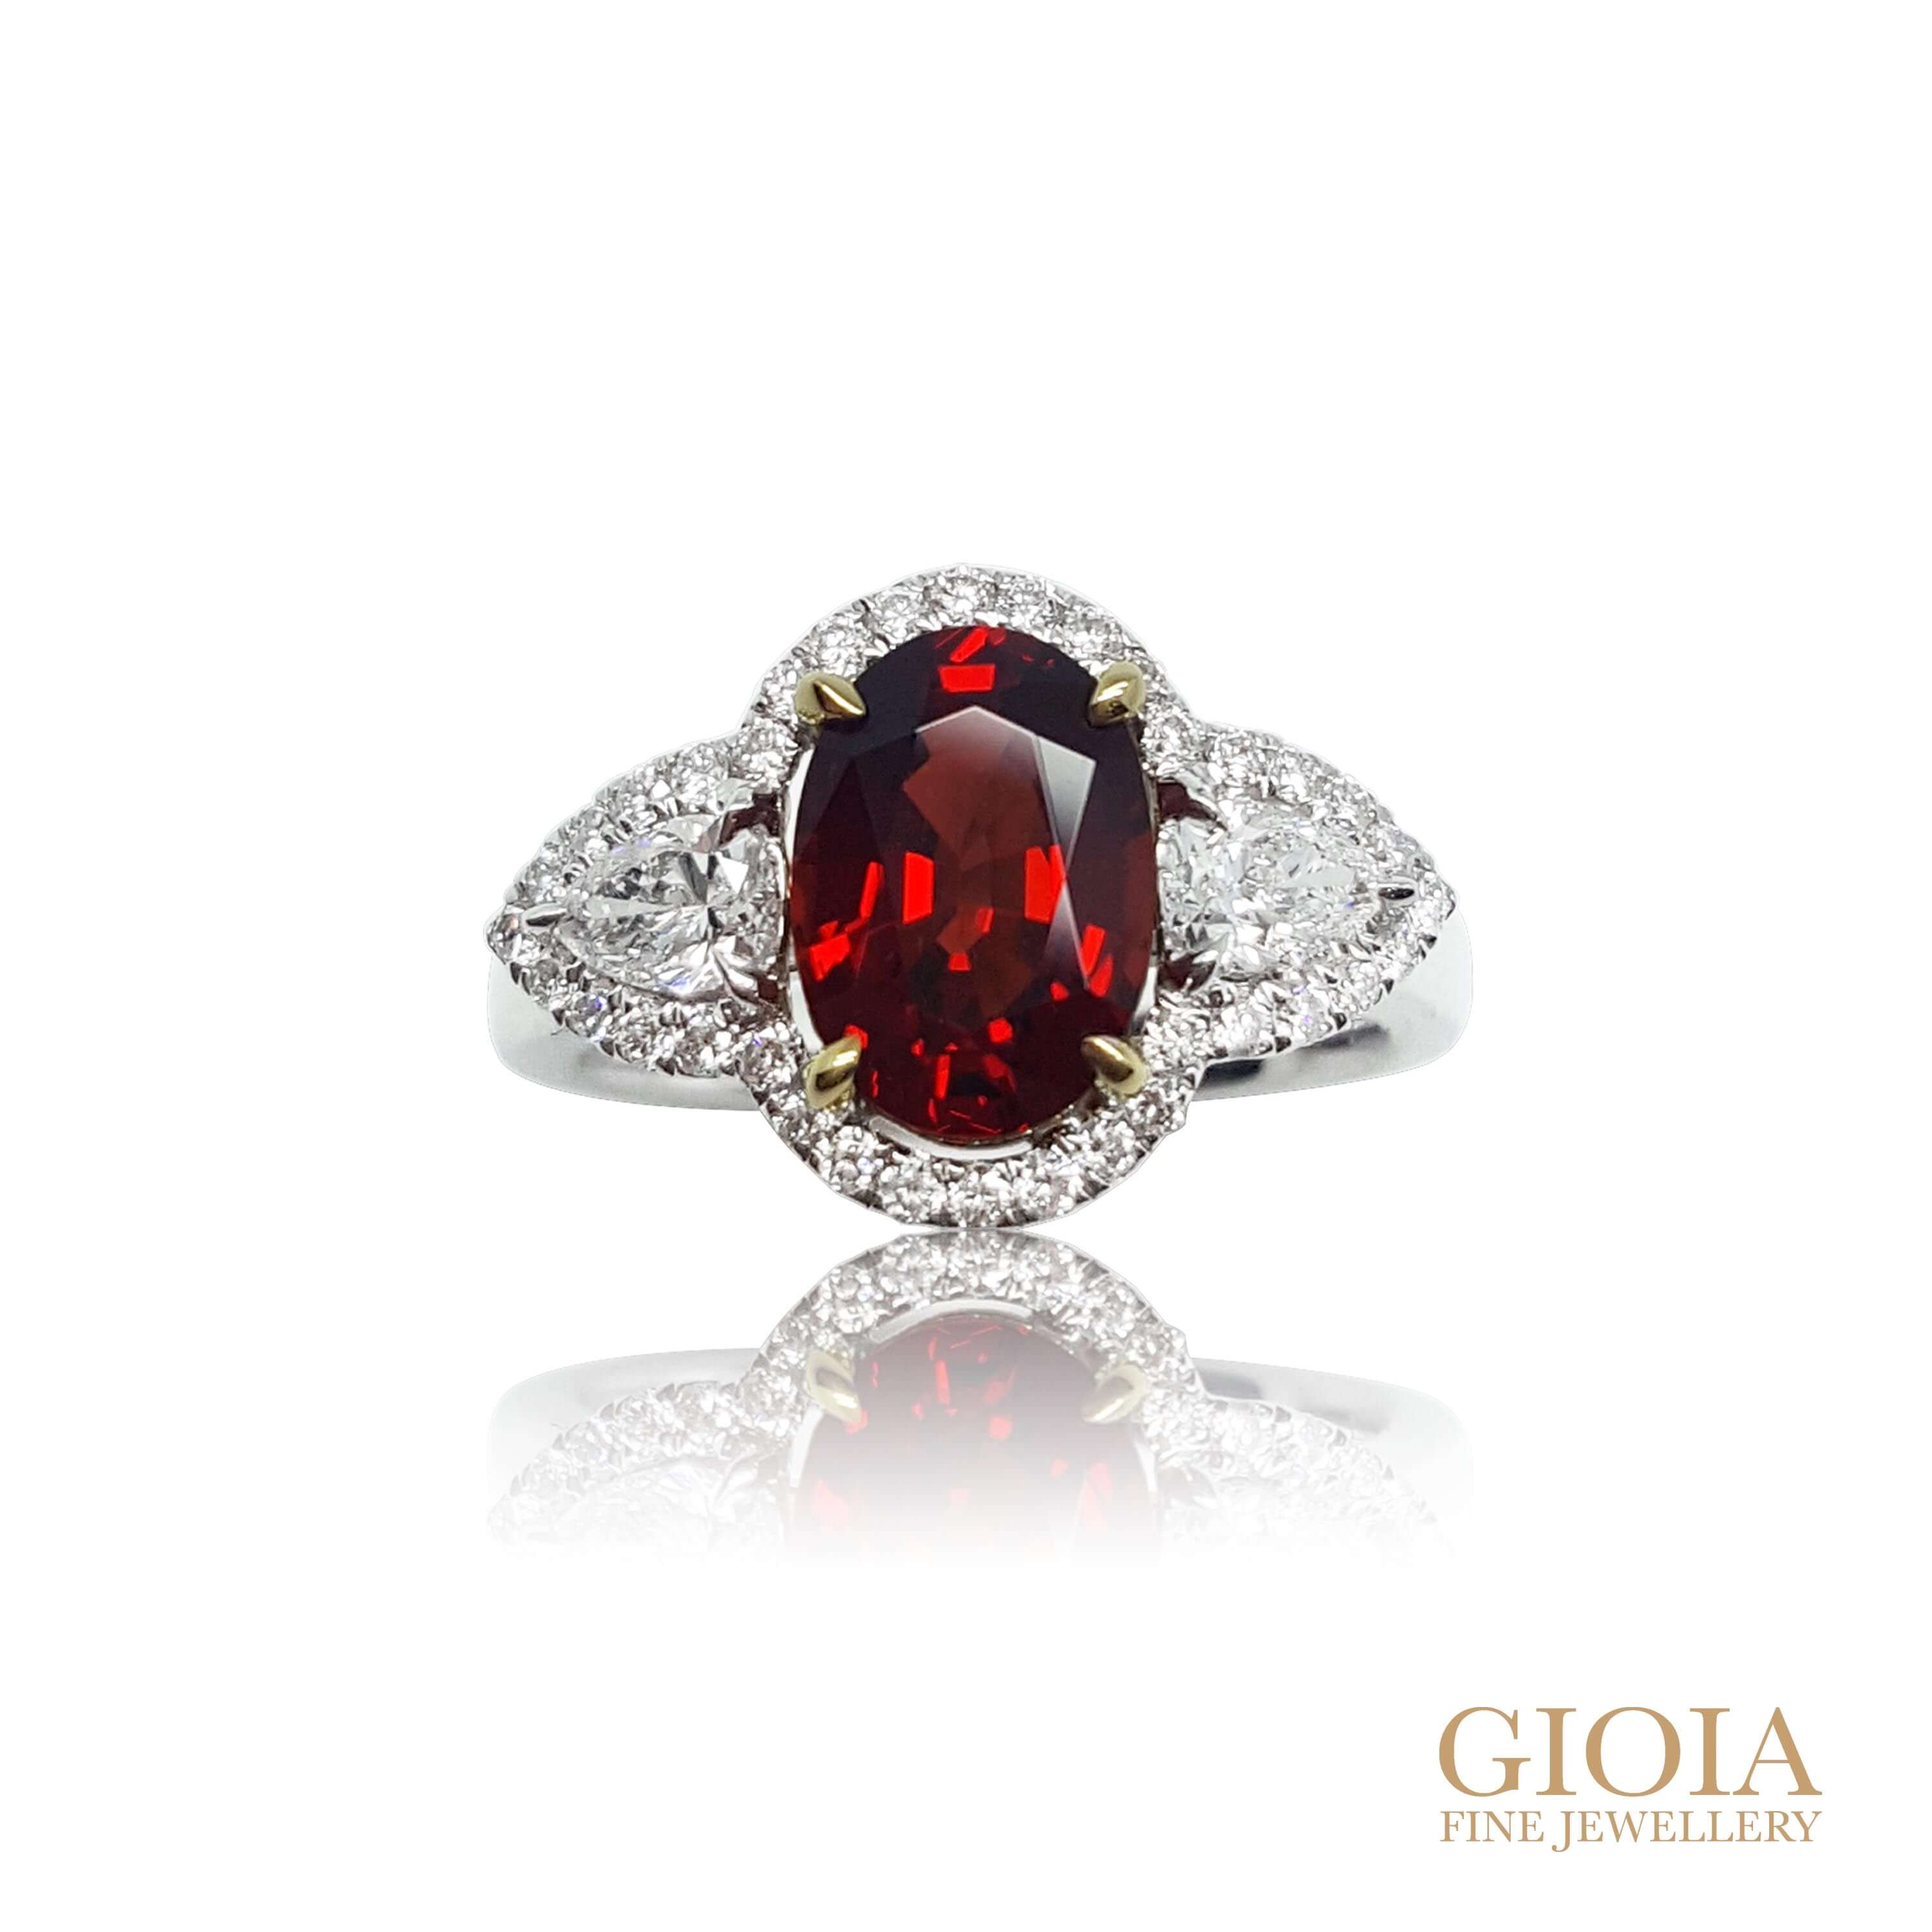 Vivid Red Spinel Ring - Looking for Red Spinel or Ruby Gemstone ring? Local Singapore Customised Jeweller